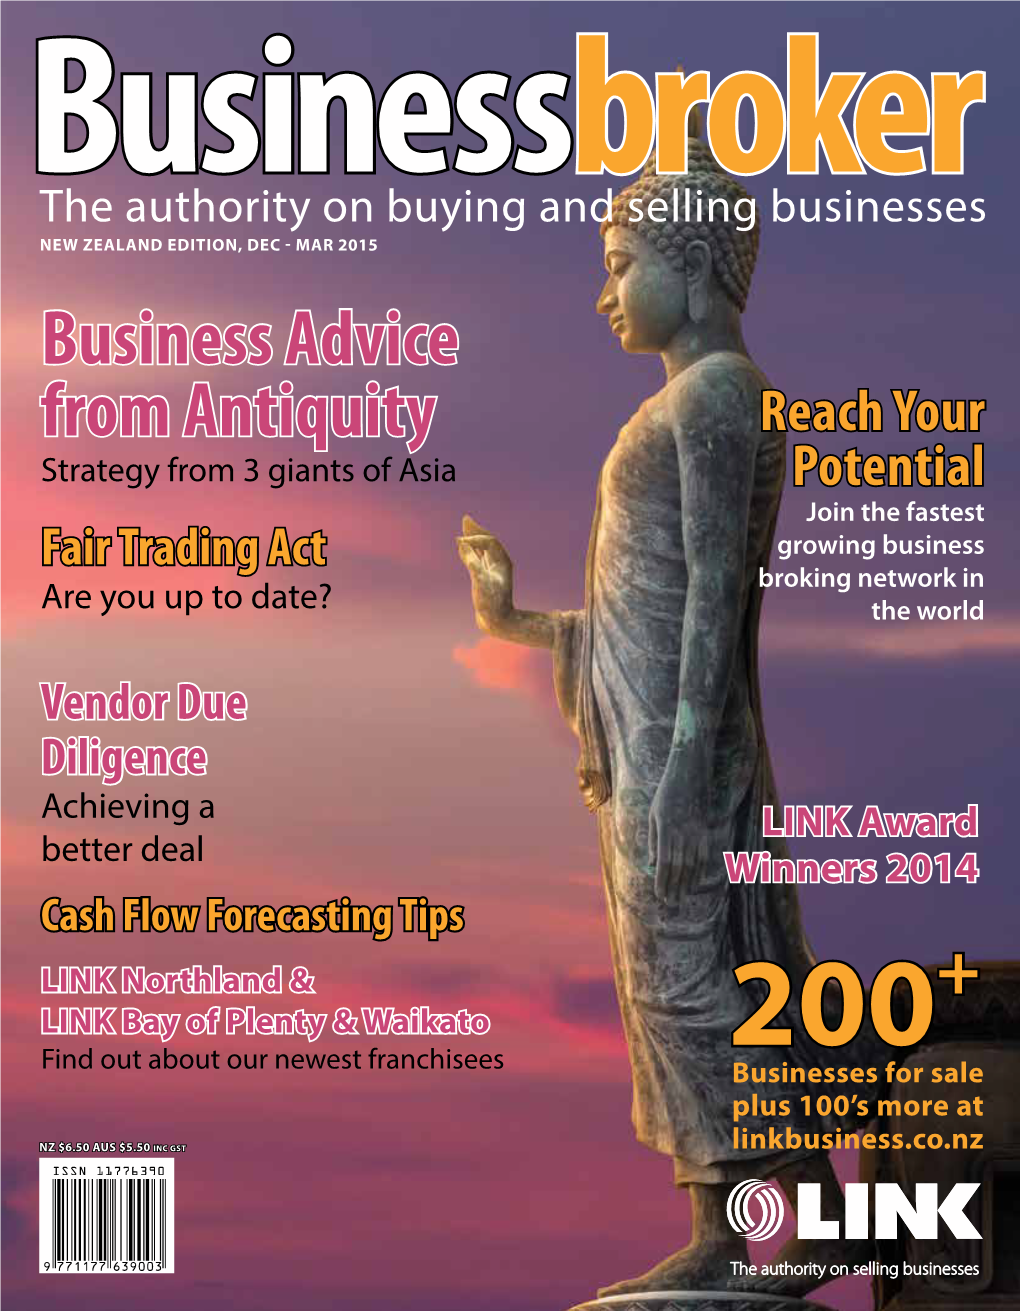 The Authority on Buying and Selling Businesses NEW ZEALAND EDITION, DEC - MAR 2015